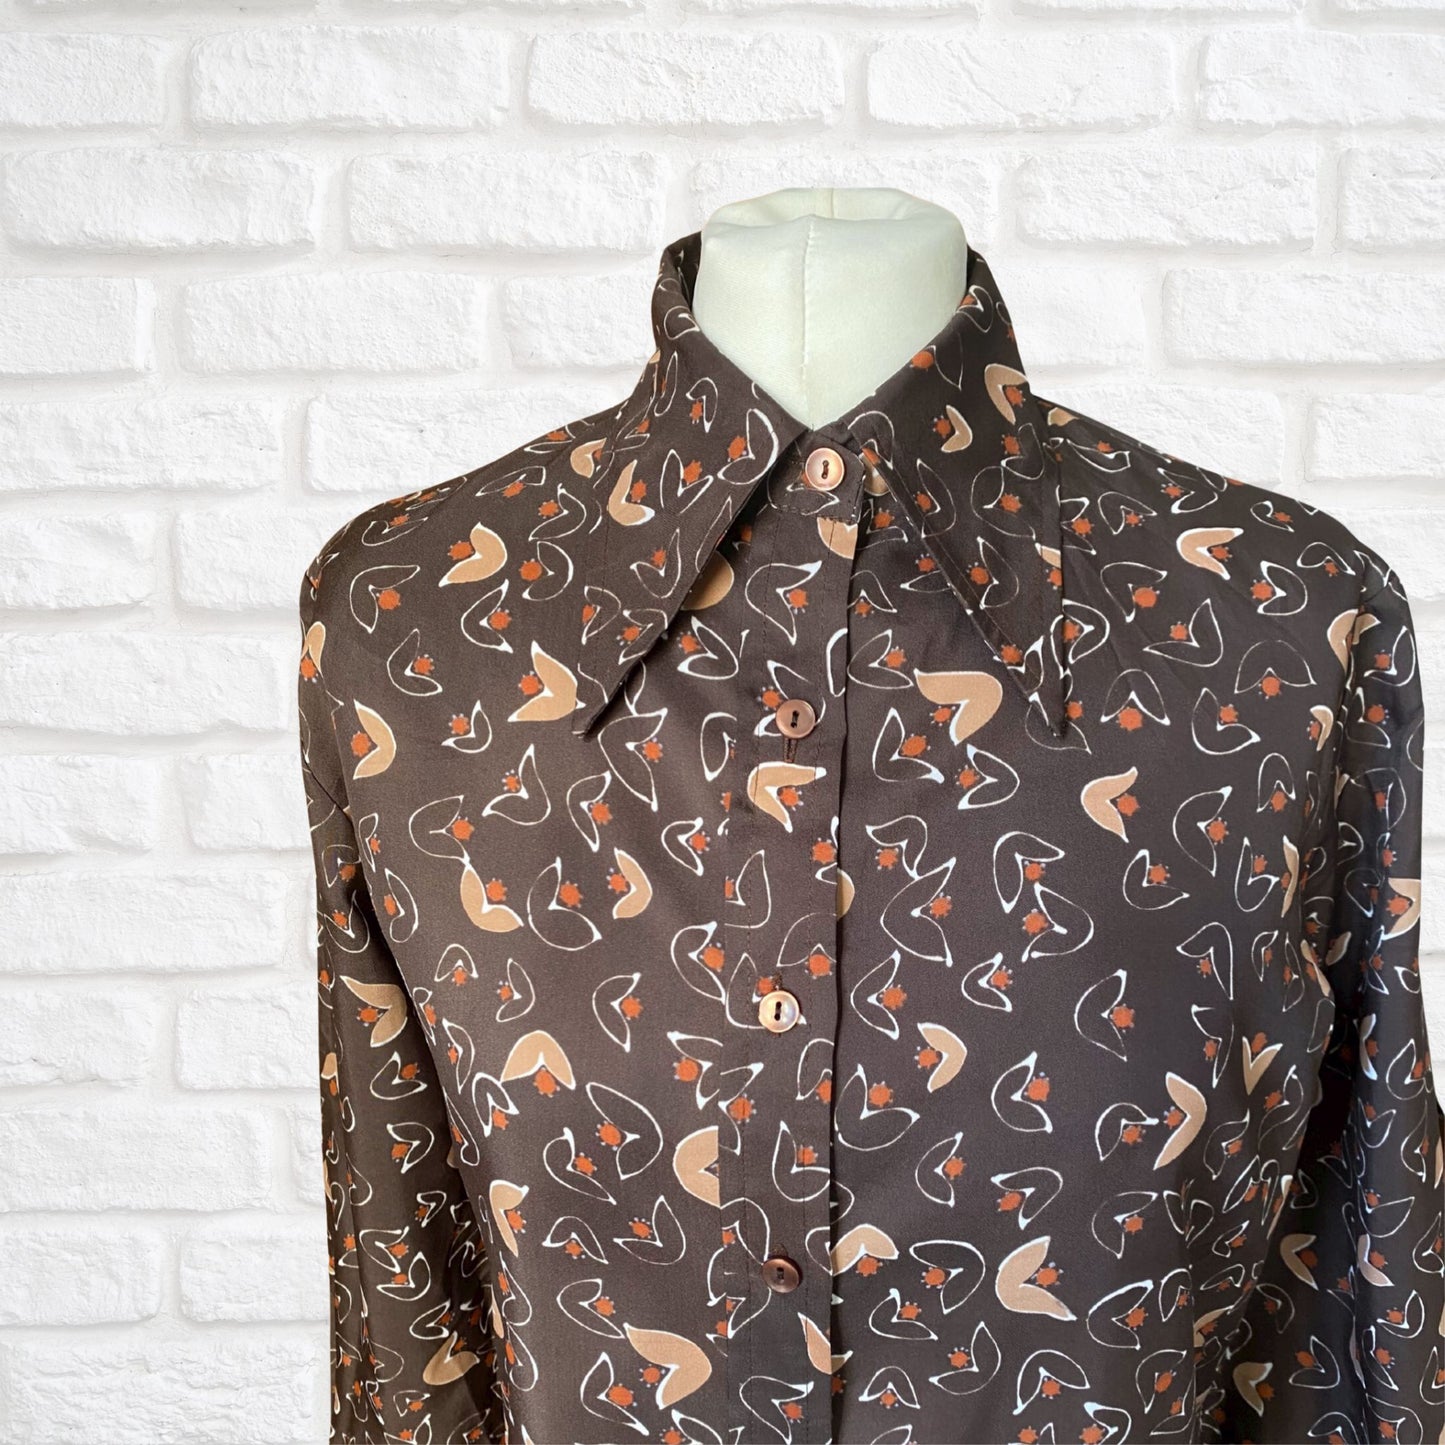 70s Brown, White,Grey and Orange Abstract Print Dagger Collar Shirt. Approx UK size 10-14